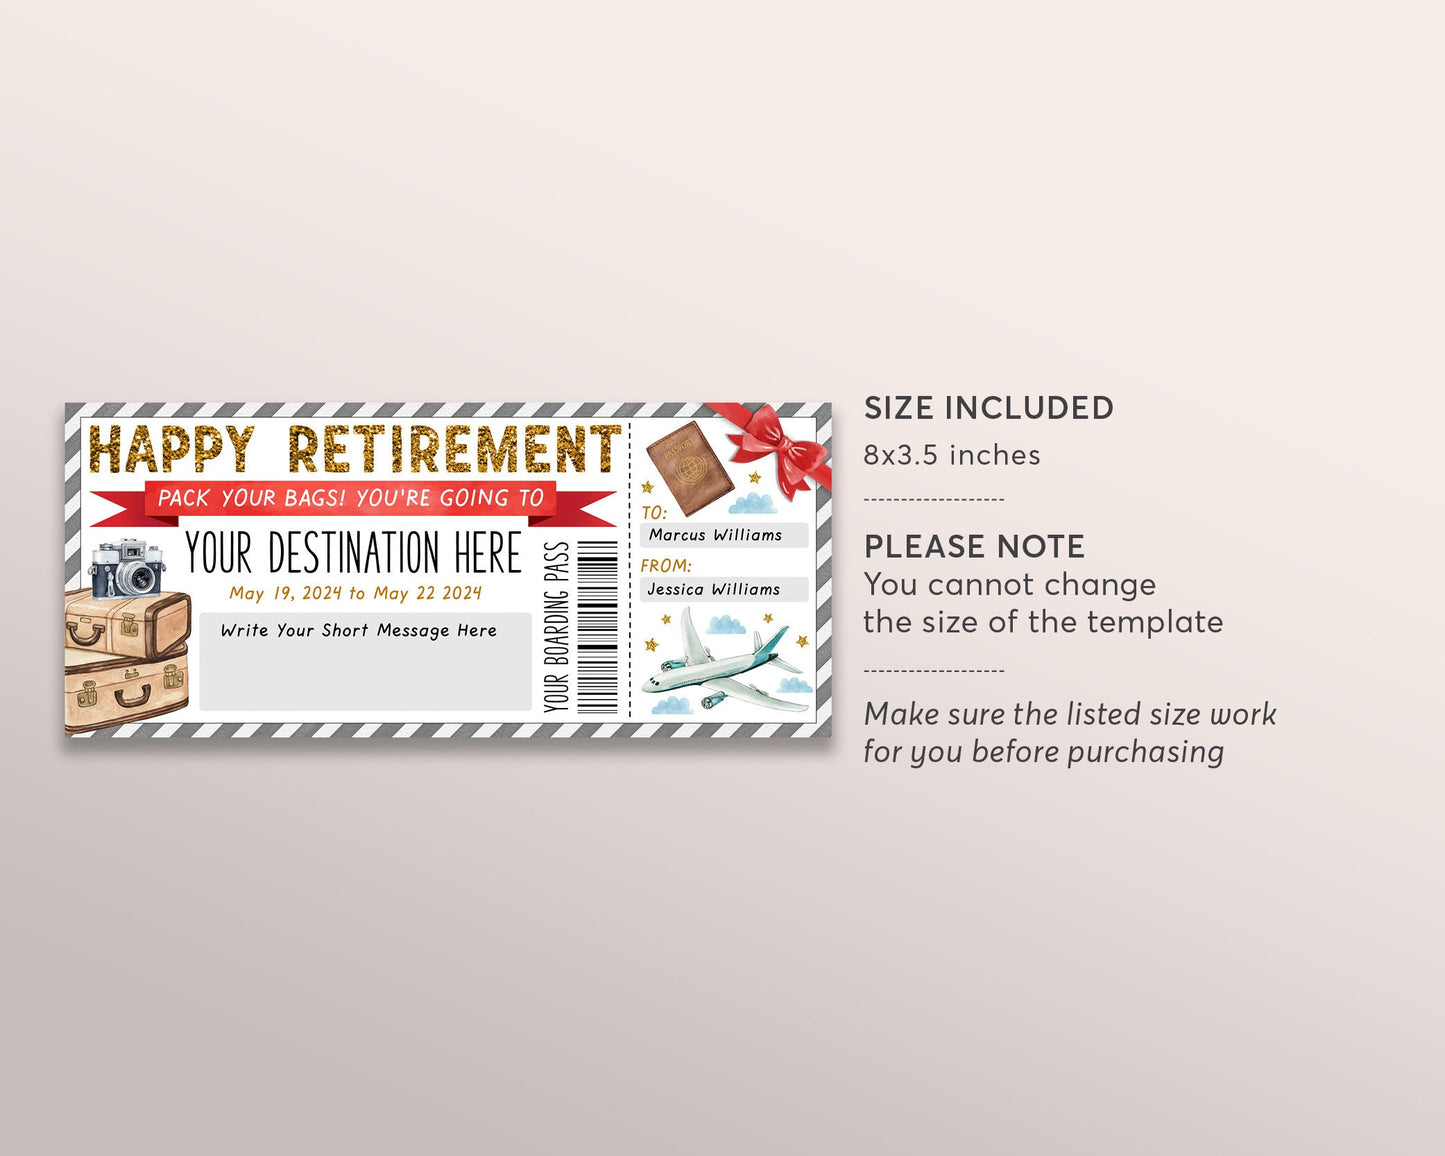 Retirement Boarding Pass Editable Template, Surprise Trip Getaway Plane Ticket For Retiree Vacation Travel Holiday Flight Destination Reveal